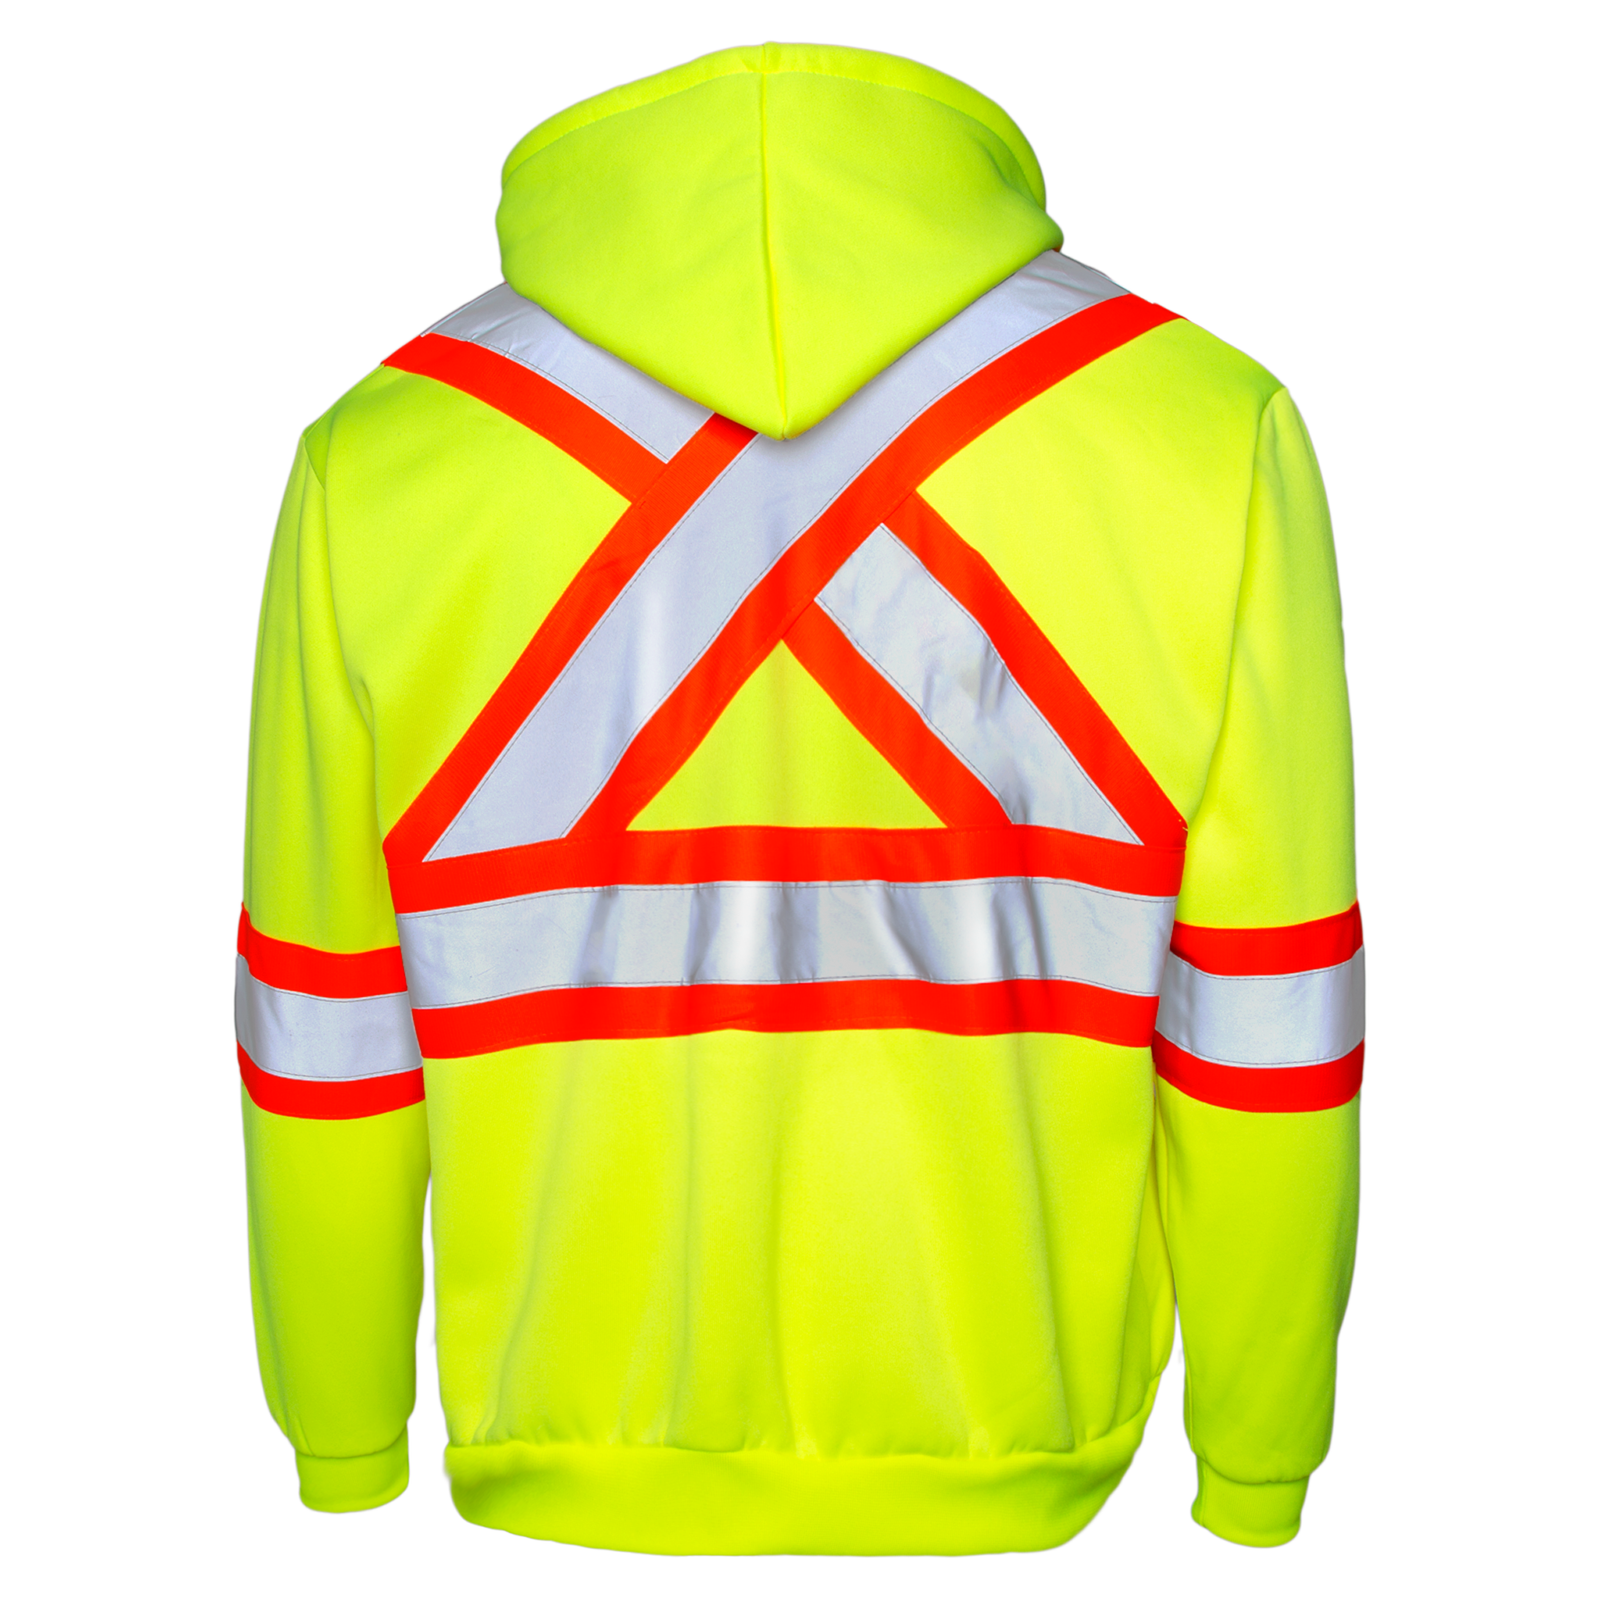 Back view of the yellow JORESTECH hi-vis sweater with reflective and orange contracting stripes,  X on the back and full zipper